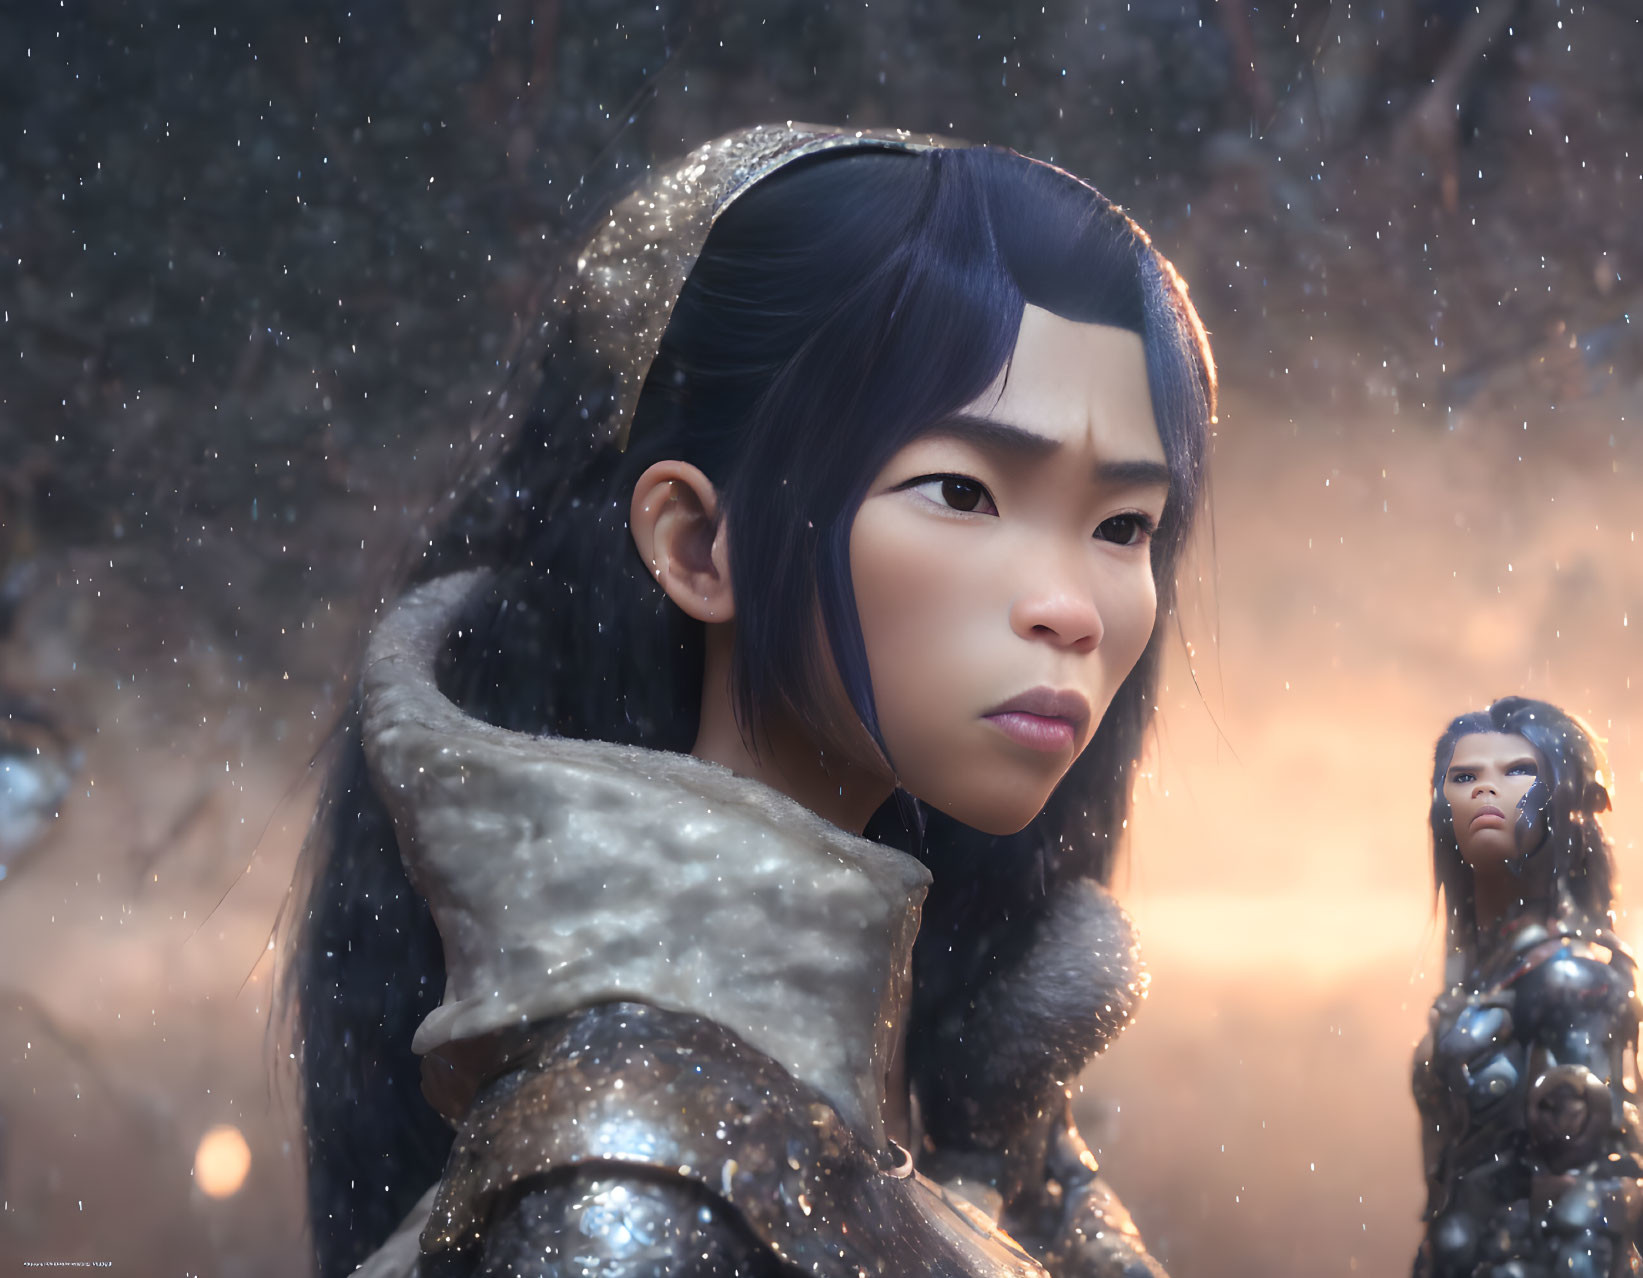 Close-up of digital artwork: Two Asian warrior women in armor with falling snowflakes.